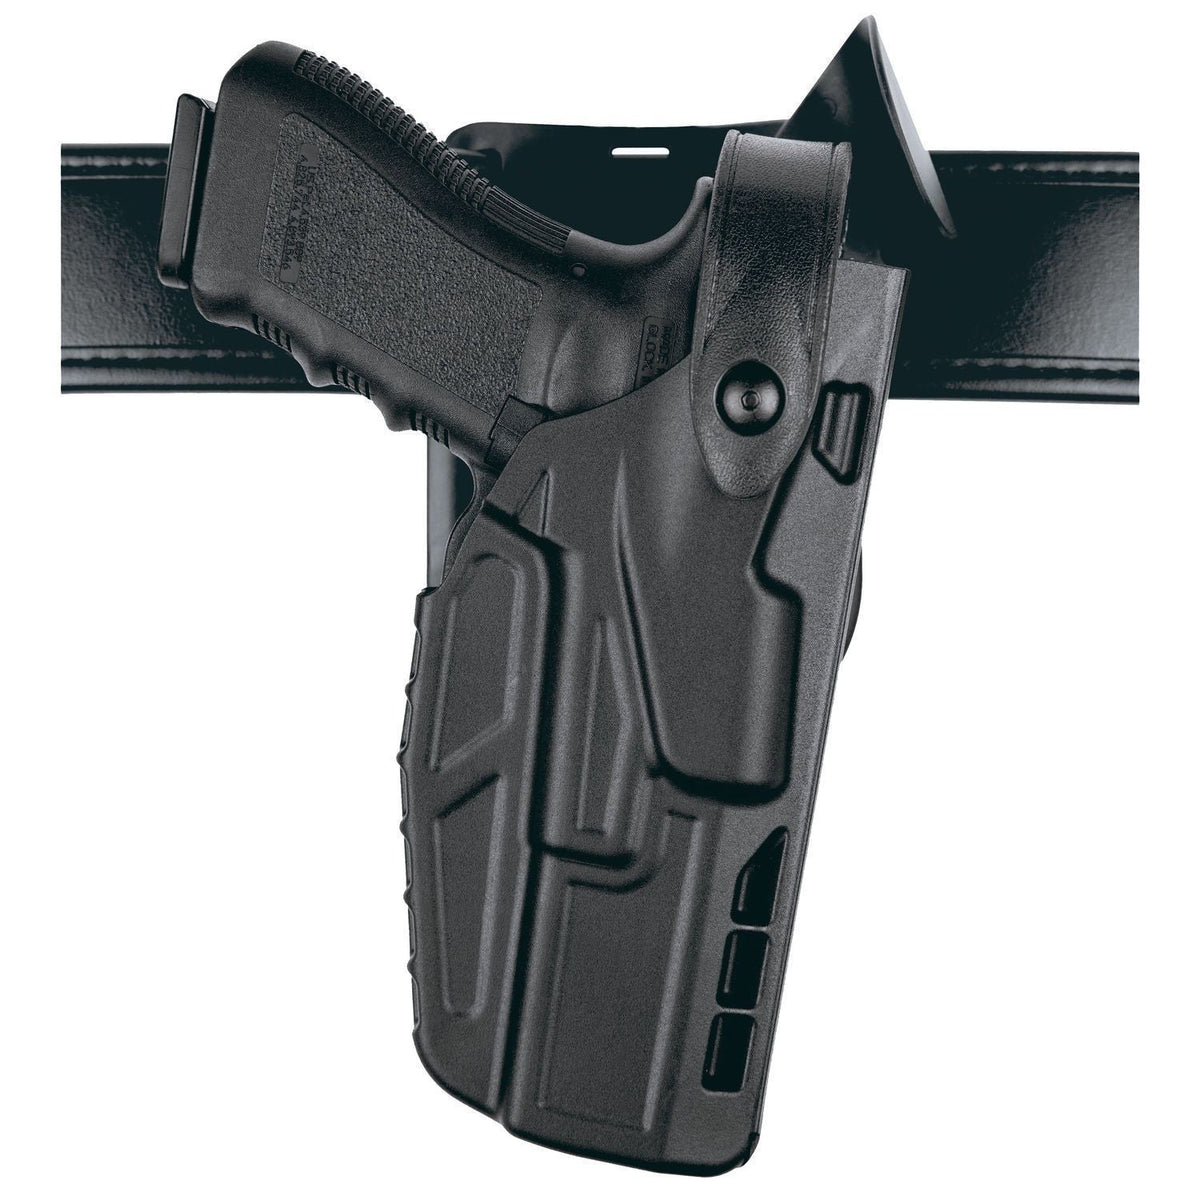 Safariland 7TS ALS/SLS Low-Ride Level III Retention Duty Holster for Glock 17 and 22 Holsters Safariland Tactical Gear Supplier Tactical Distributors Australia